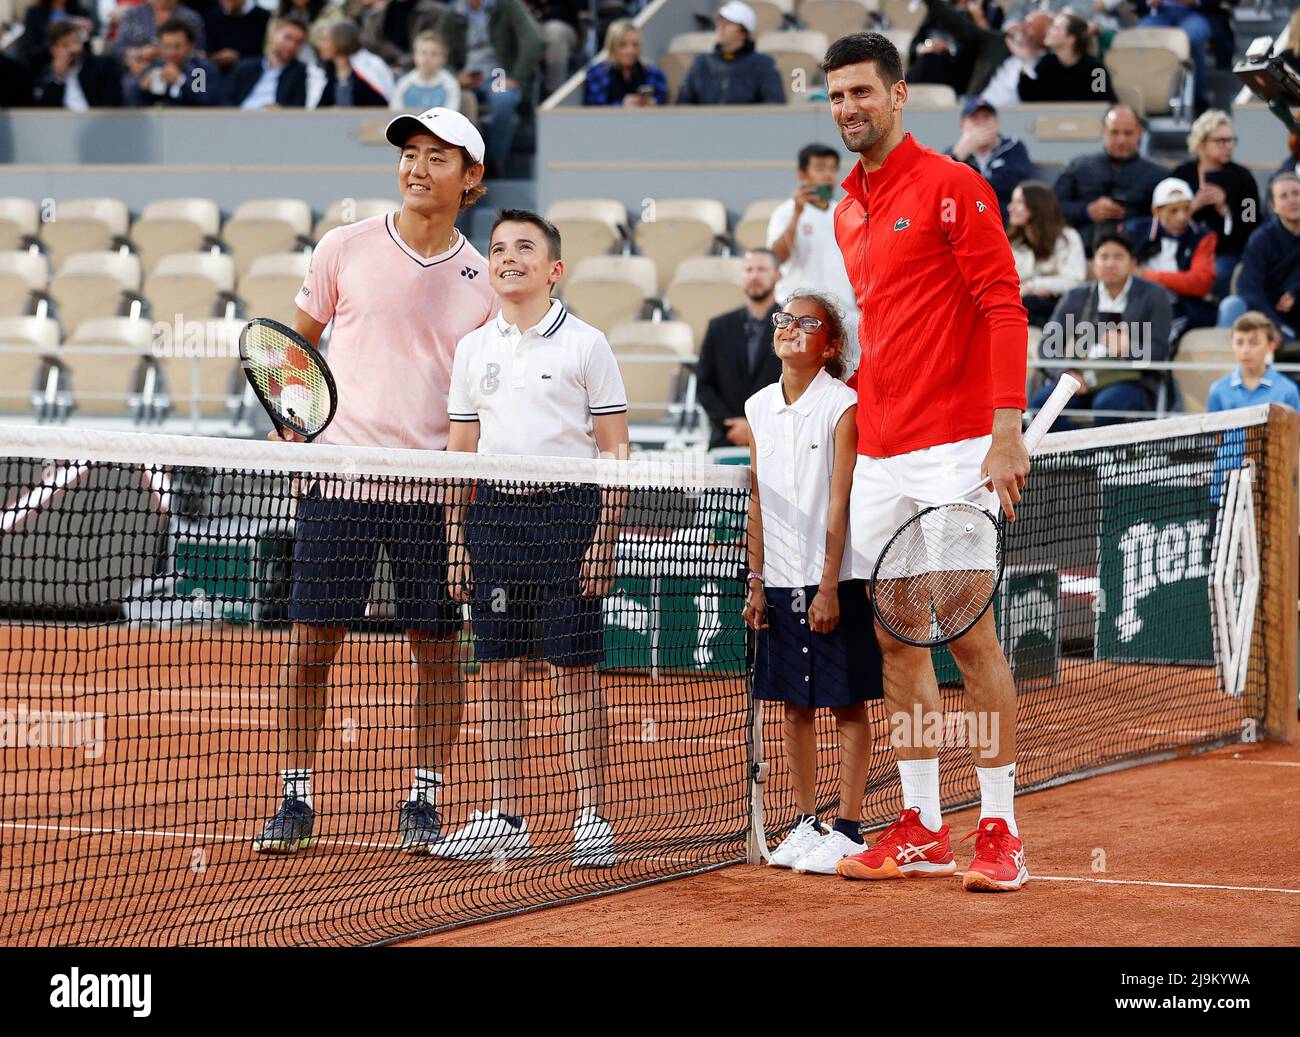 Paris, France, May 23 2022, Yoshihito NISHIOKA (JPN) and Novak DJOKOVIC (SRB) during Day 02 of the 2022 French Open at Roland Garros on May 23 2022 in Paris, France, Photo by